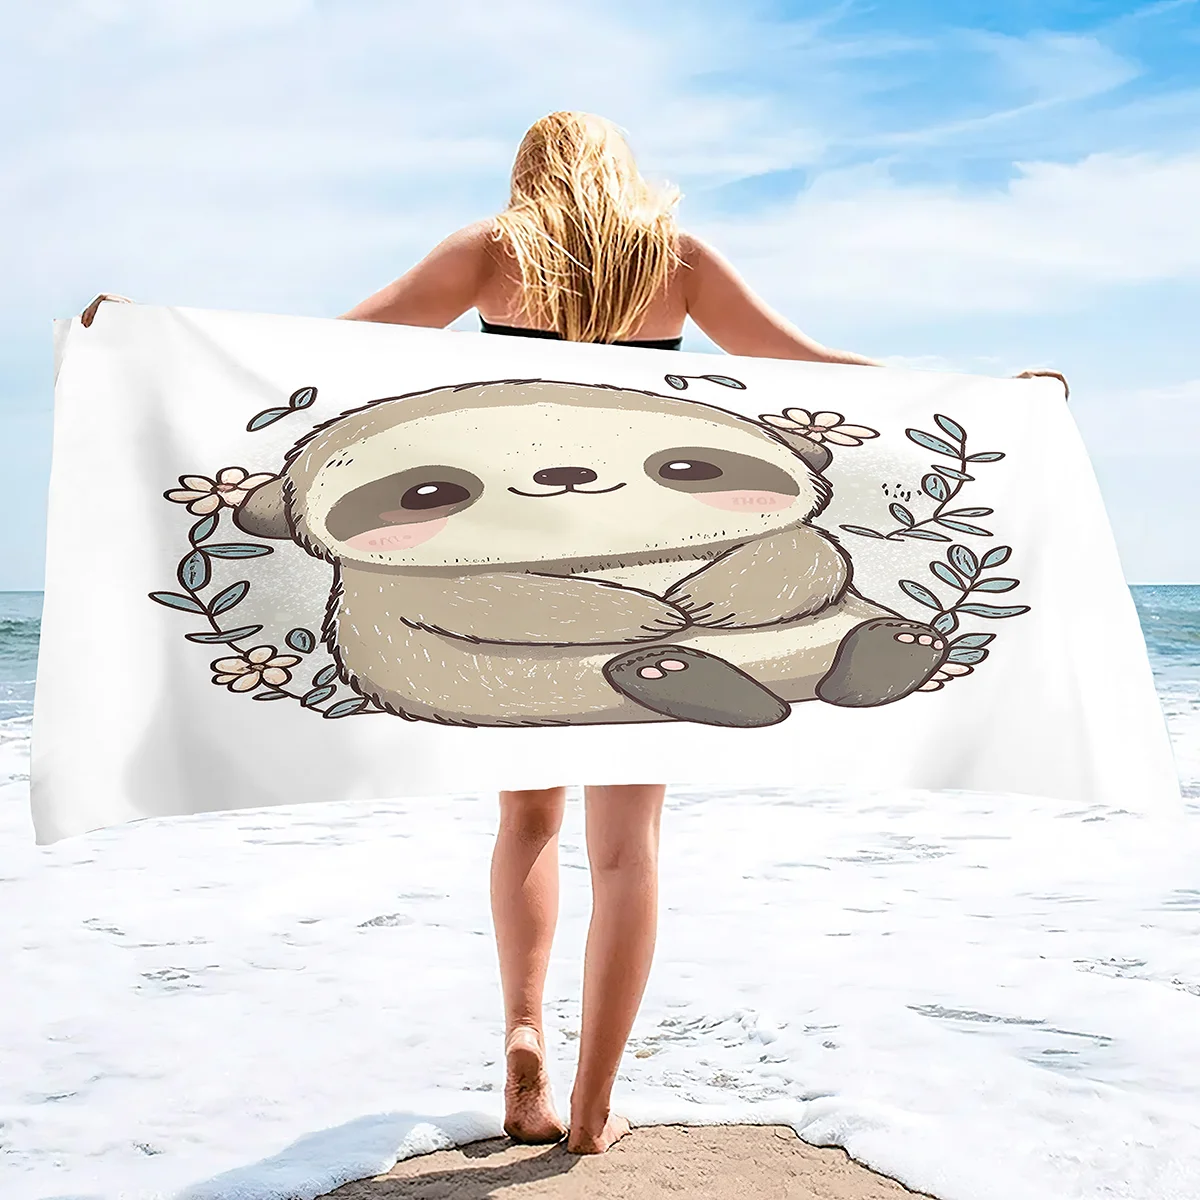 

Oversized Sloth Beach Towel for Women Girls Kids,Super Soft Microfiber Quick Dry and Sand Free Towel,Lightweight Pool Yoga Towel